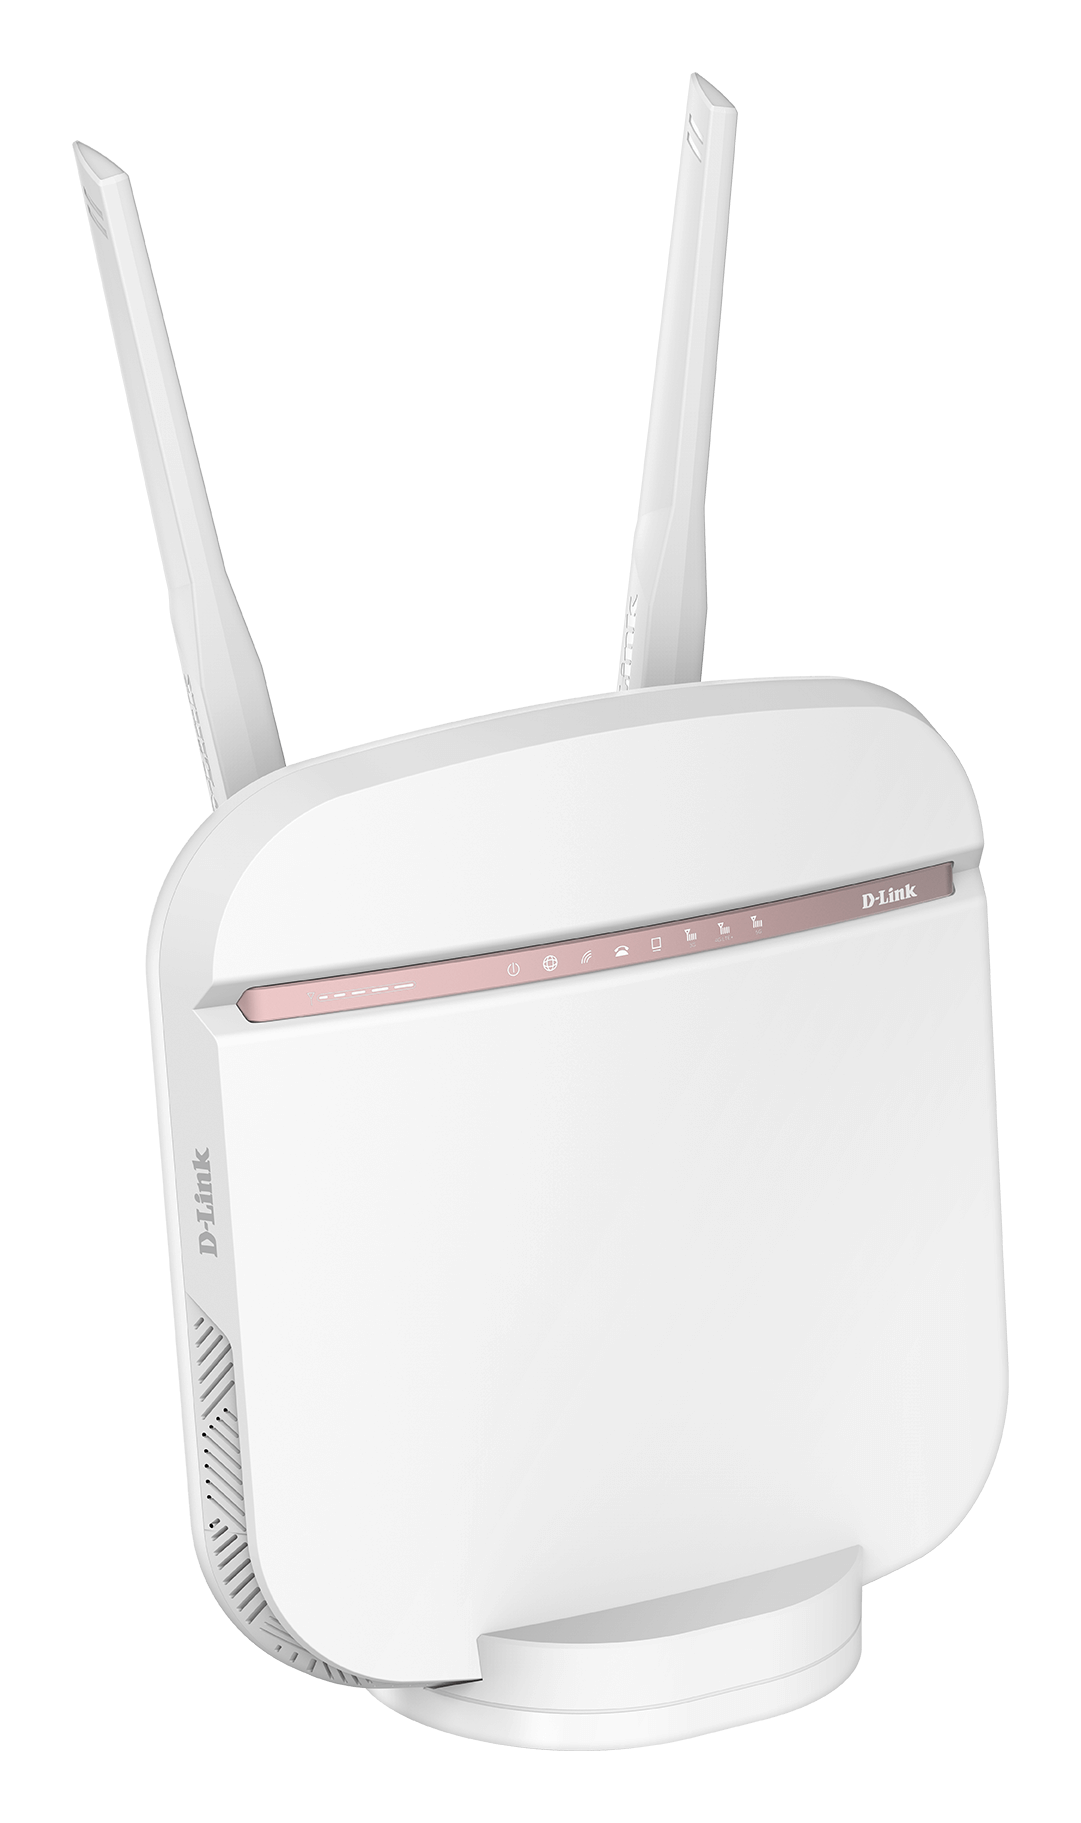 DWR-978 - 5G AC2600 Wi-Fi Router - Right side view.